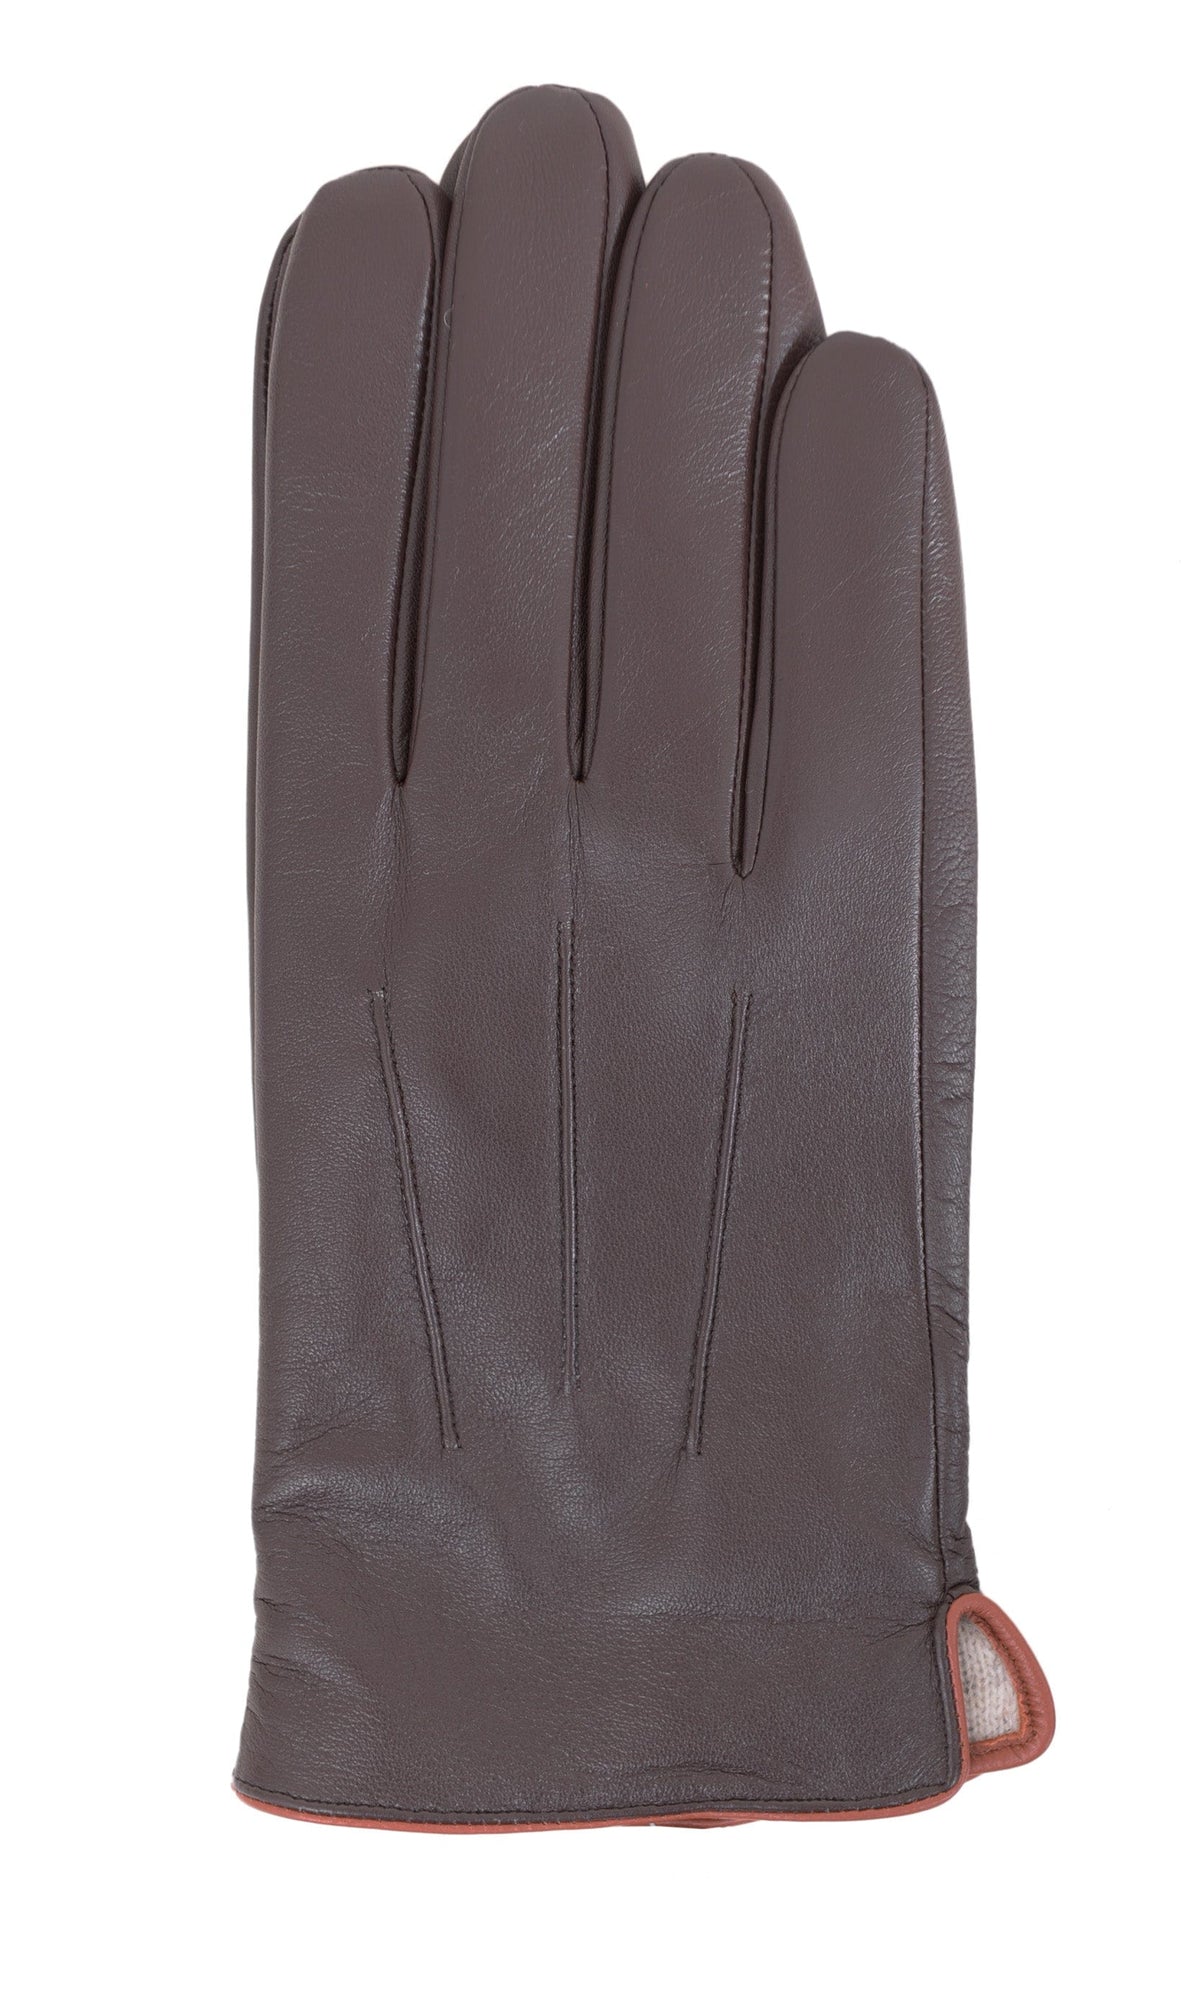 Ariston Ariston Mens Solid Brown Touch Screen Leather Gloves